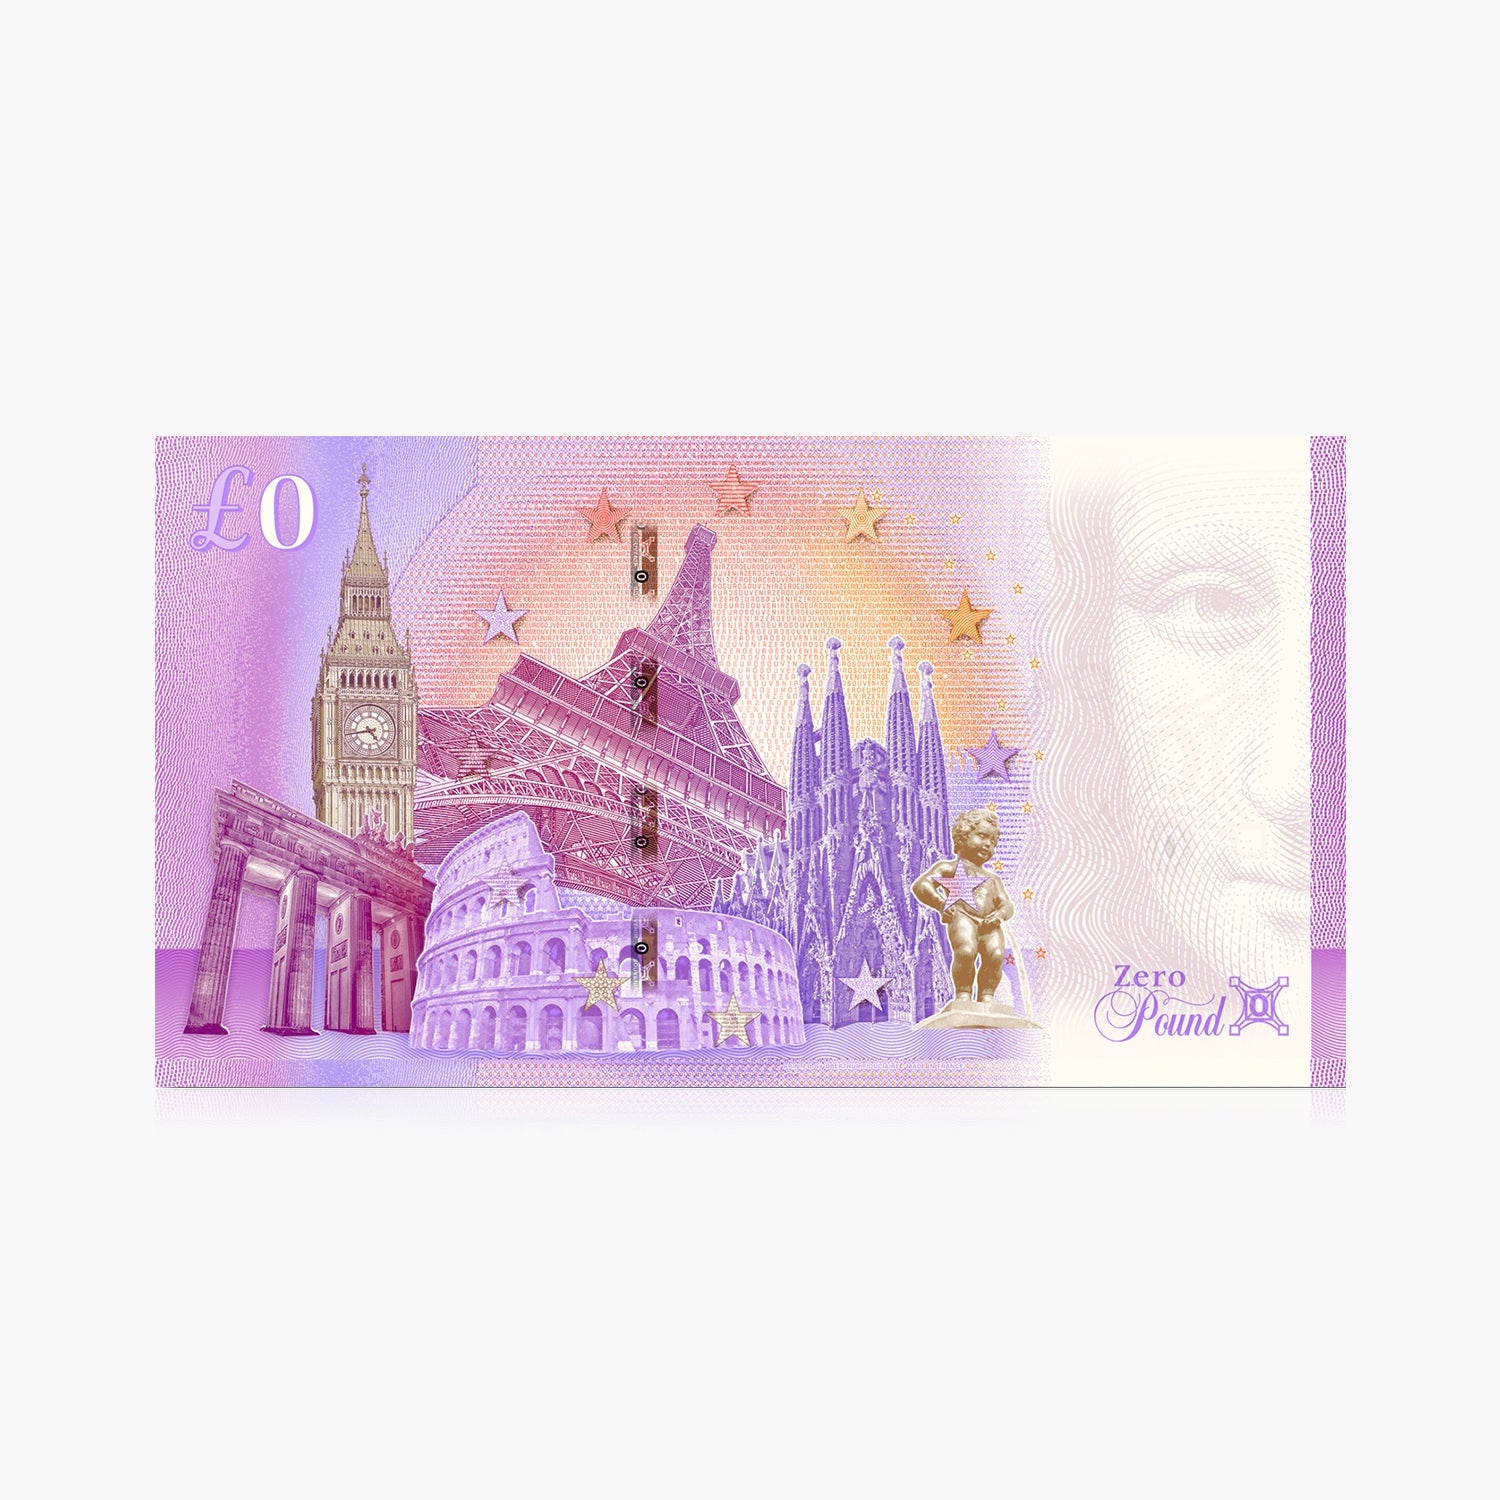 The World of Peter Rabbit £0 Banknote